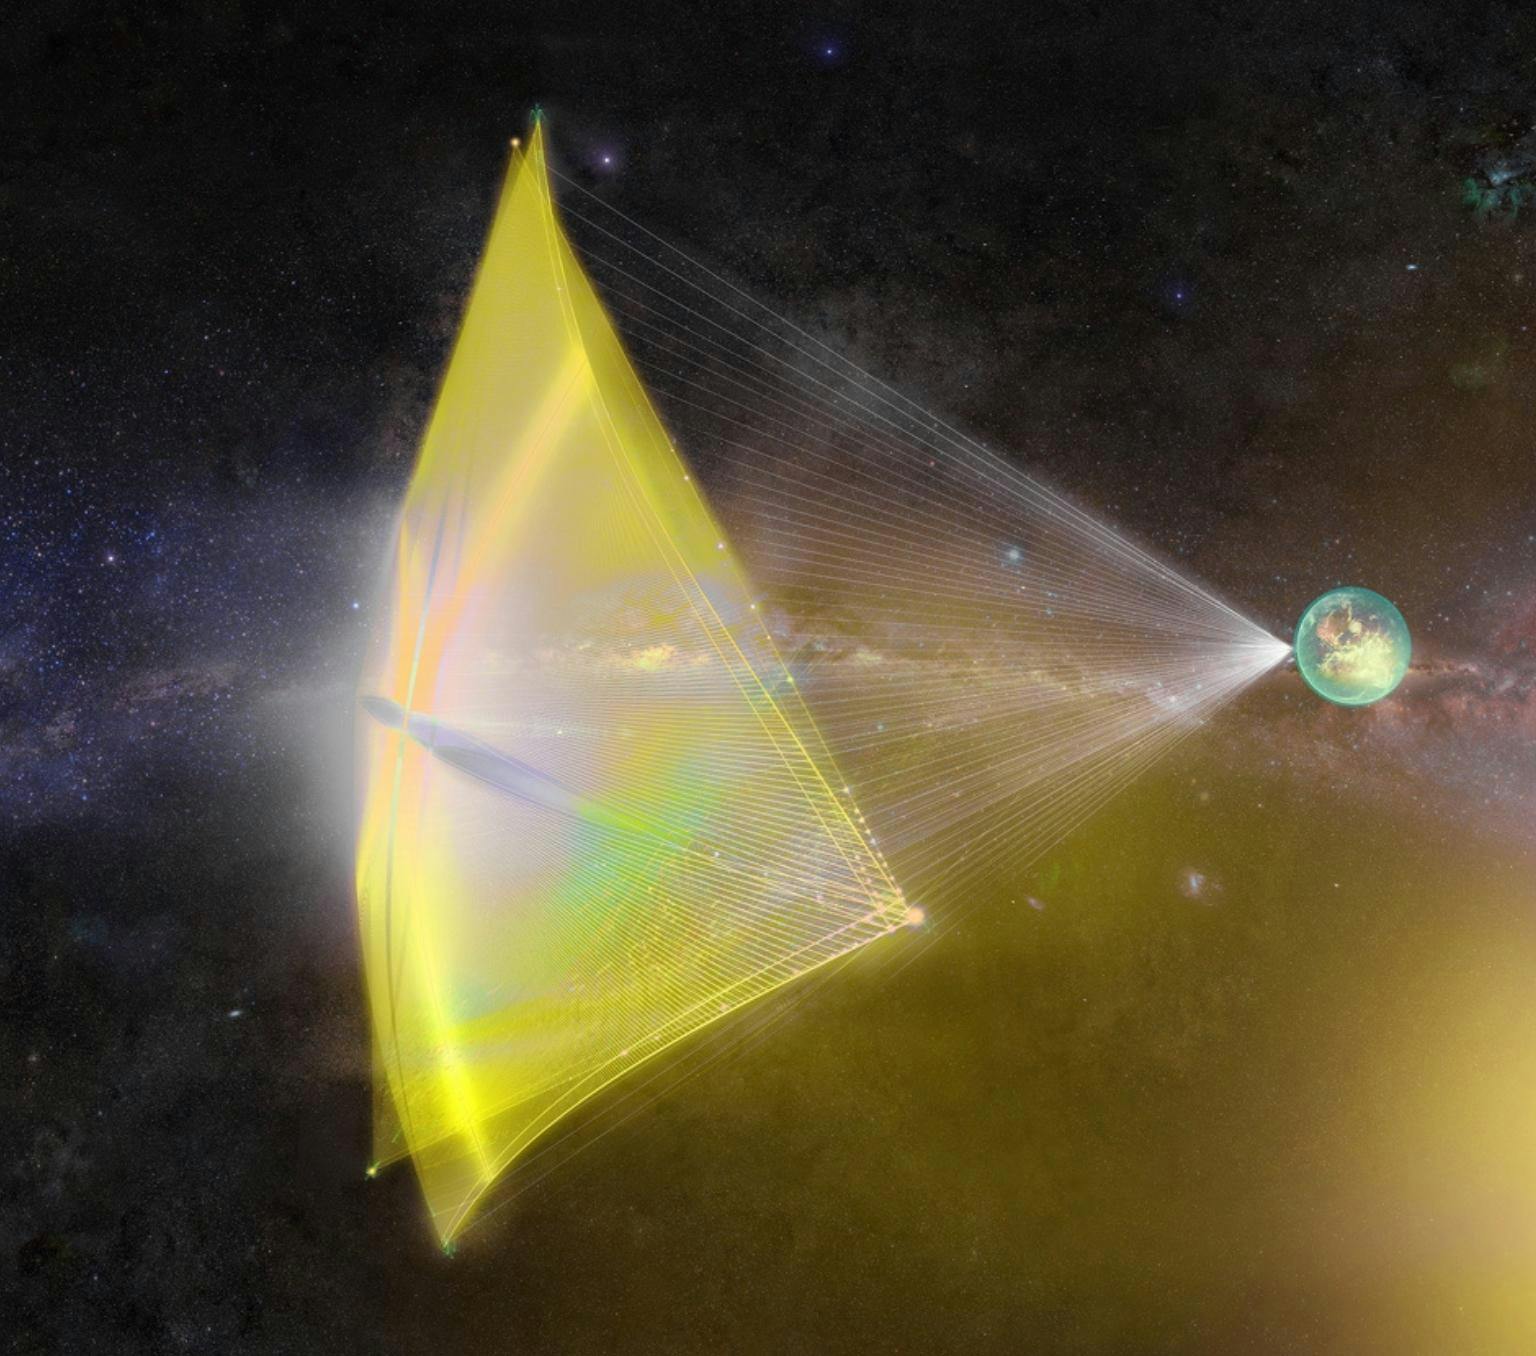 image of space. There is a green circle with white lights emitted from a point on the circle that reach to a large yellow triangle shape